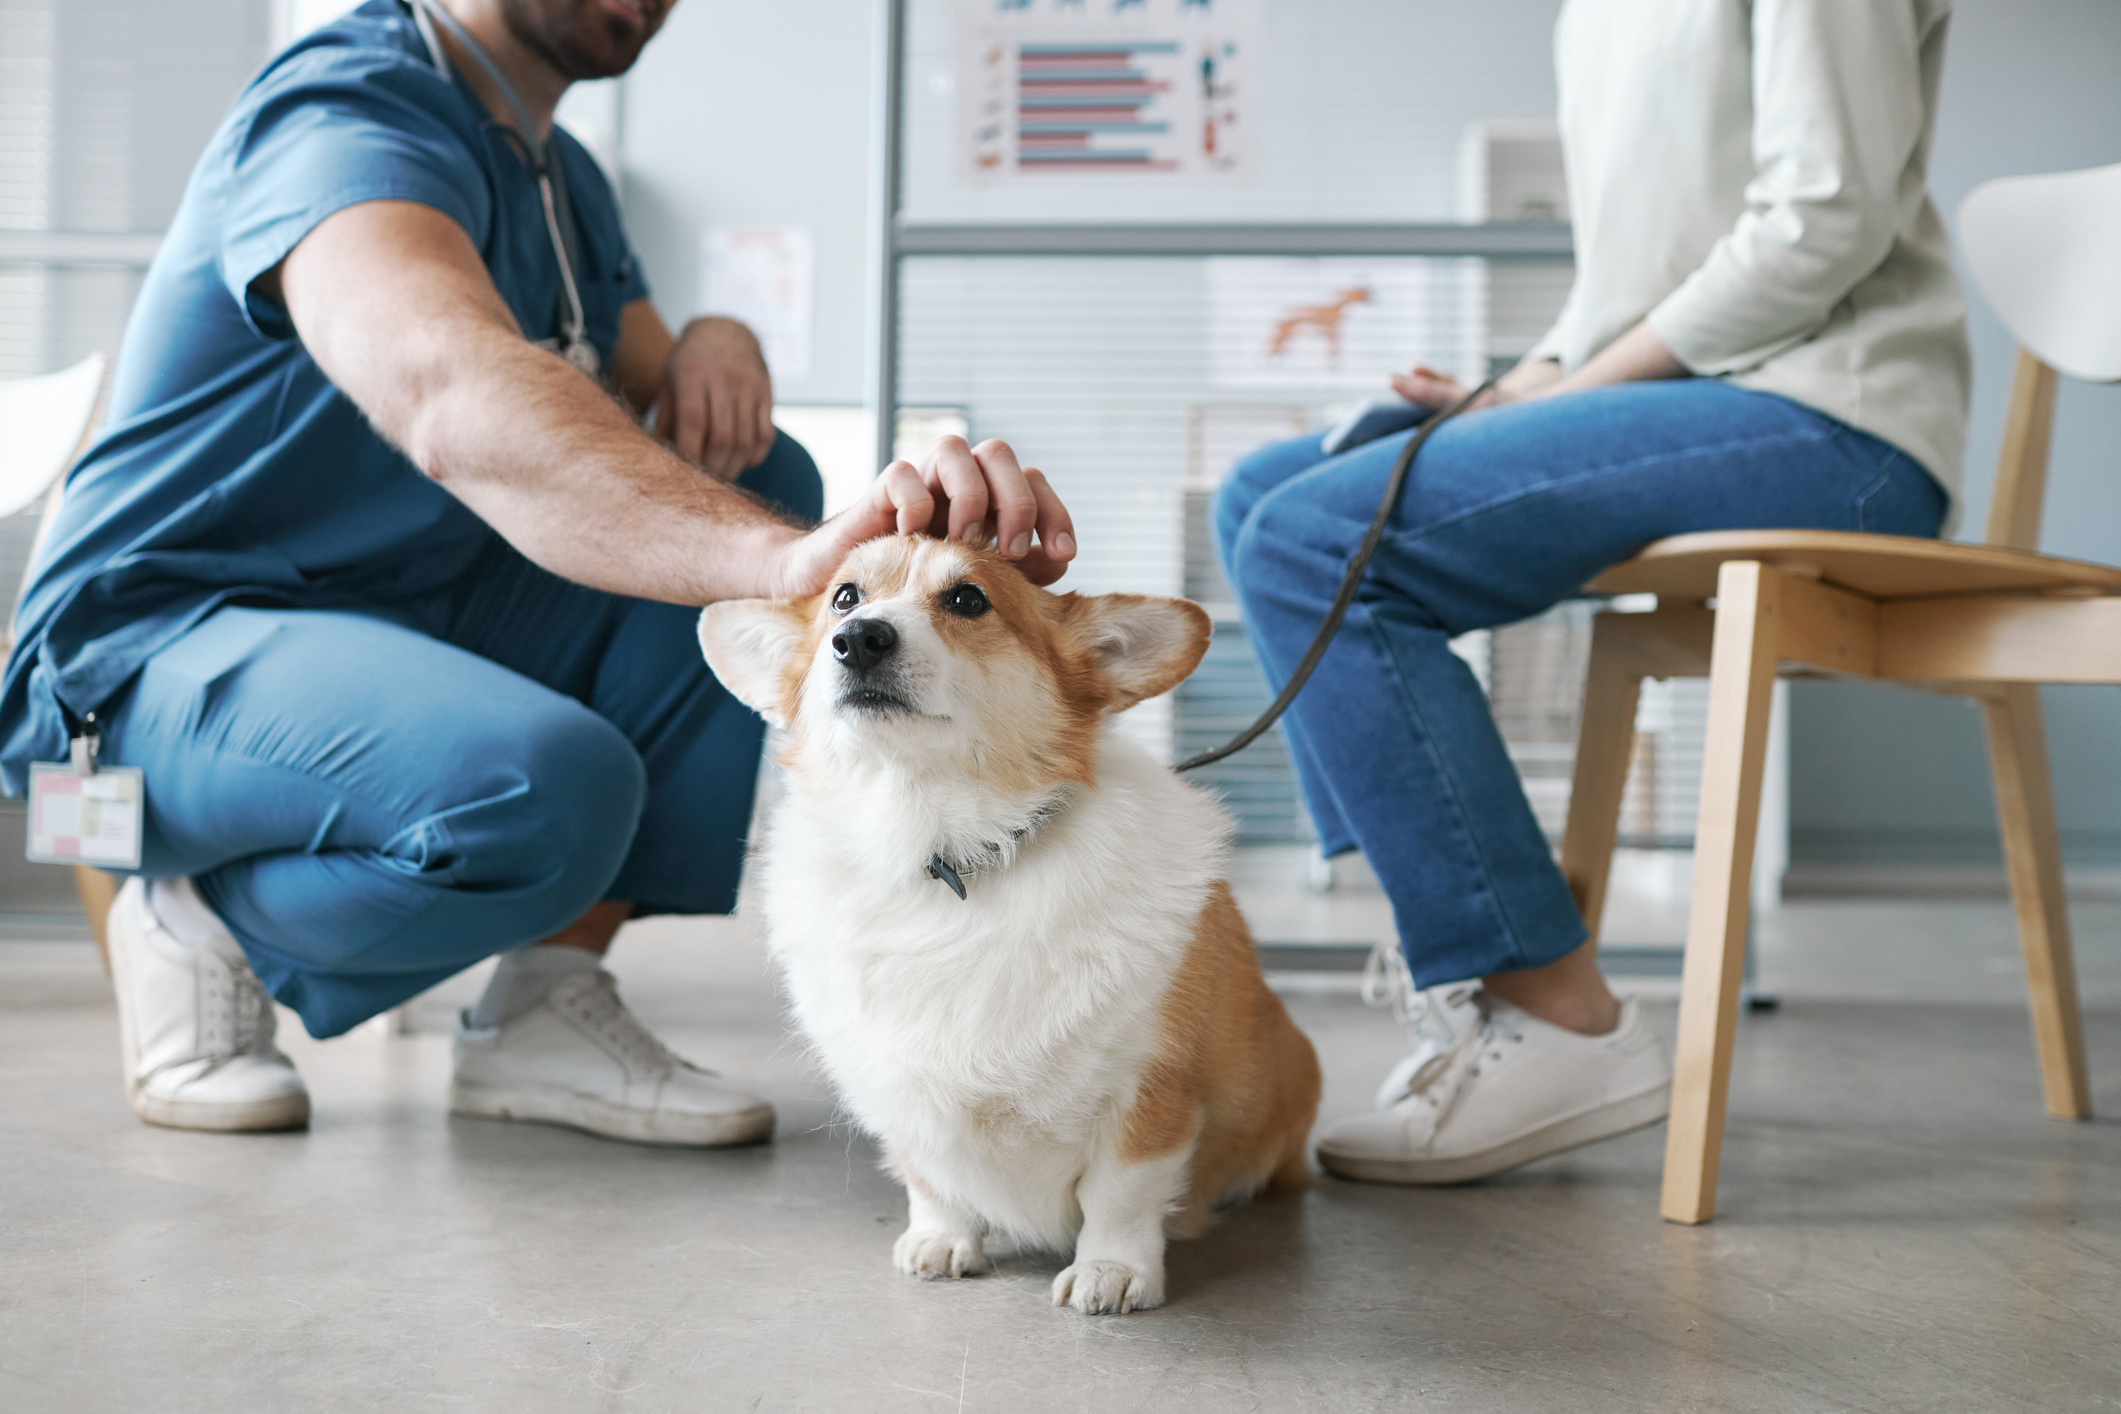 Enjoy Quality Care For Your Pets at This Plano Veterinarian